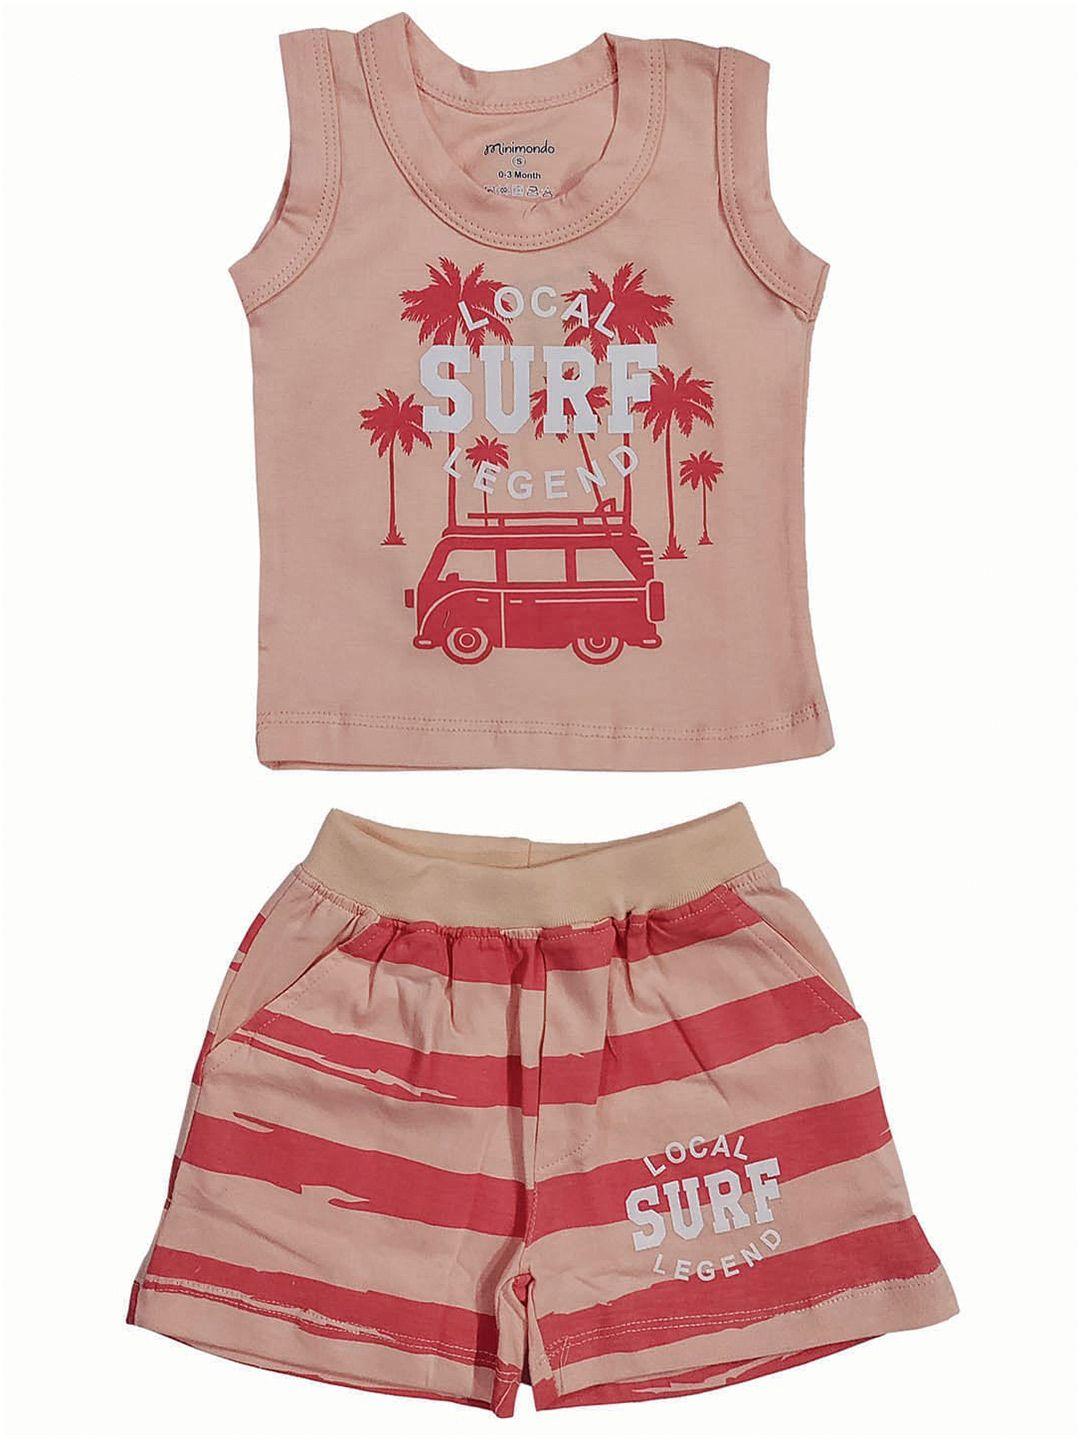 zoom minimondo unisex kids peach-coloured & red printed t-shirt with shorts